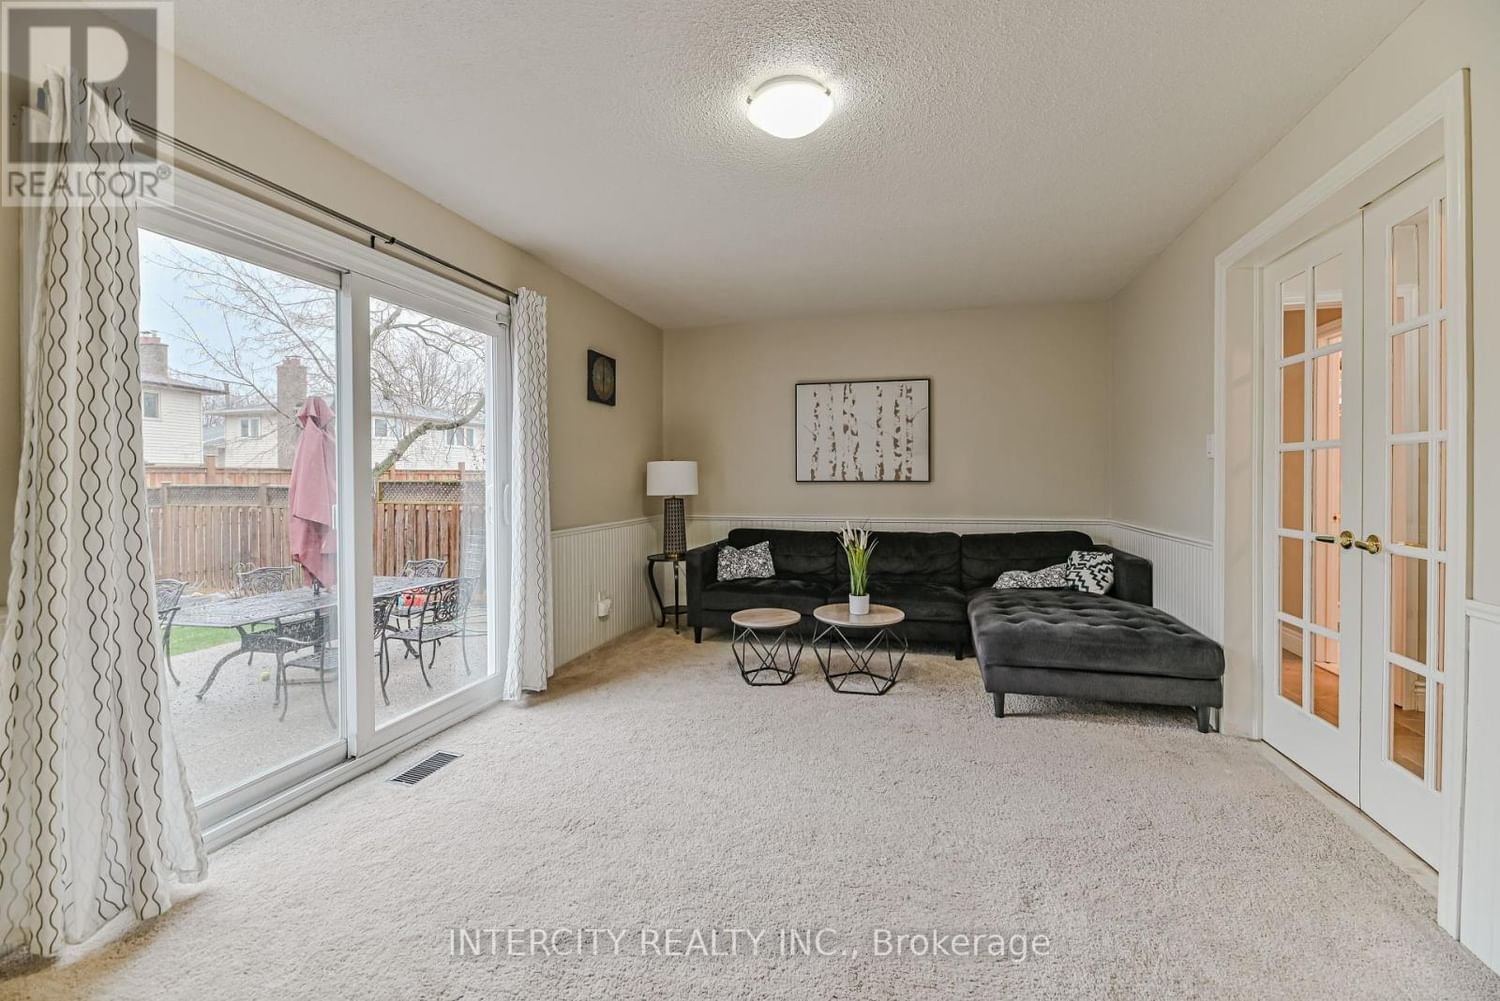 841 COULSON AVENUE Image 26